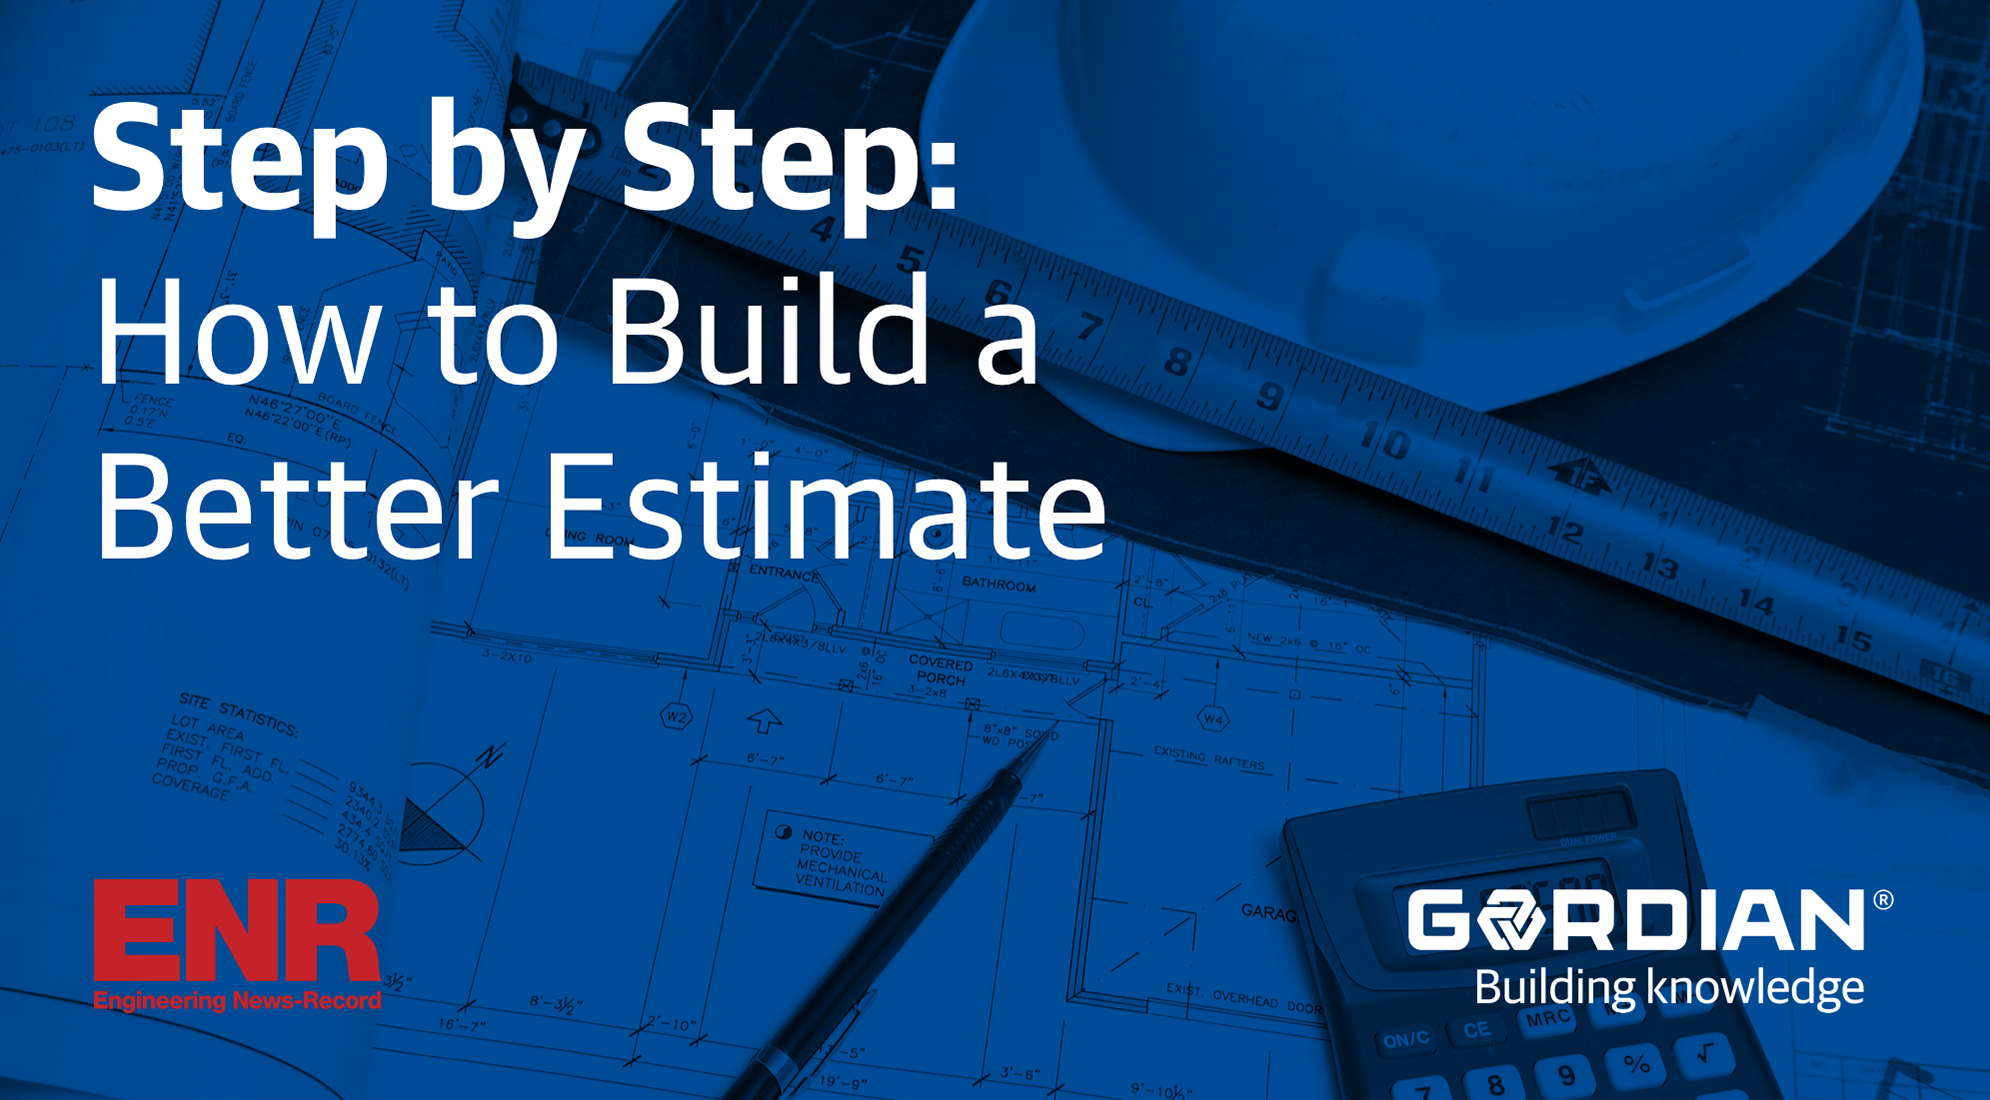 Step by Step: How to Build a Better Estimate 2